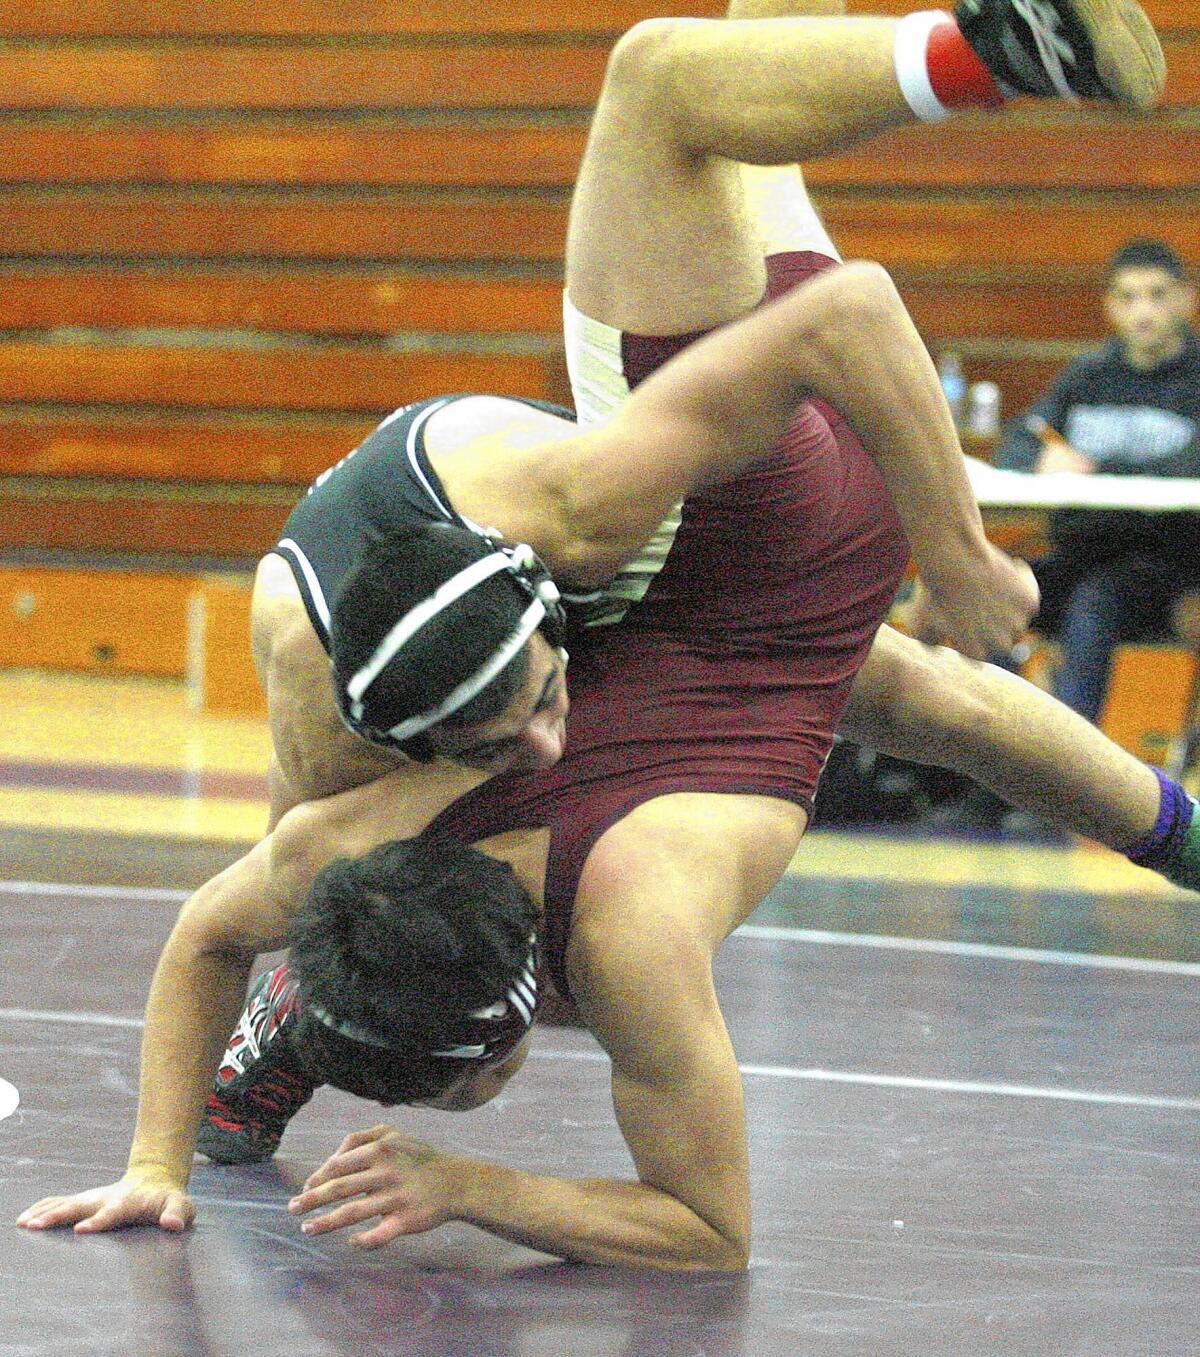 File Photo: Hoover High School's Arthur Ghukasyan flips and eventually pins La Cañada's Chris Harb in the 145-pound weight class in a non-league wrestling match at Hoover High School in Glendale on Tuesday, Jan. 29, 2013.